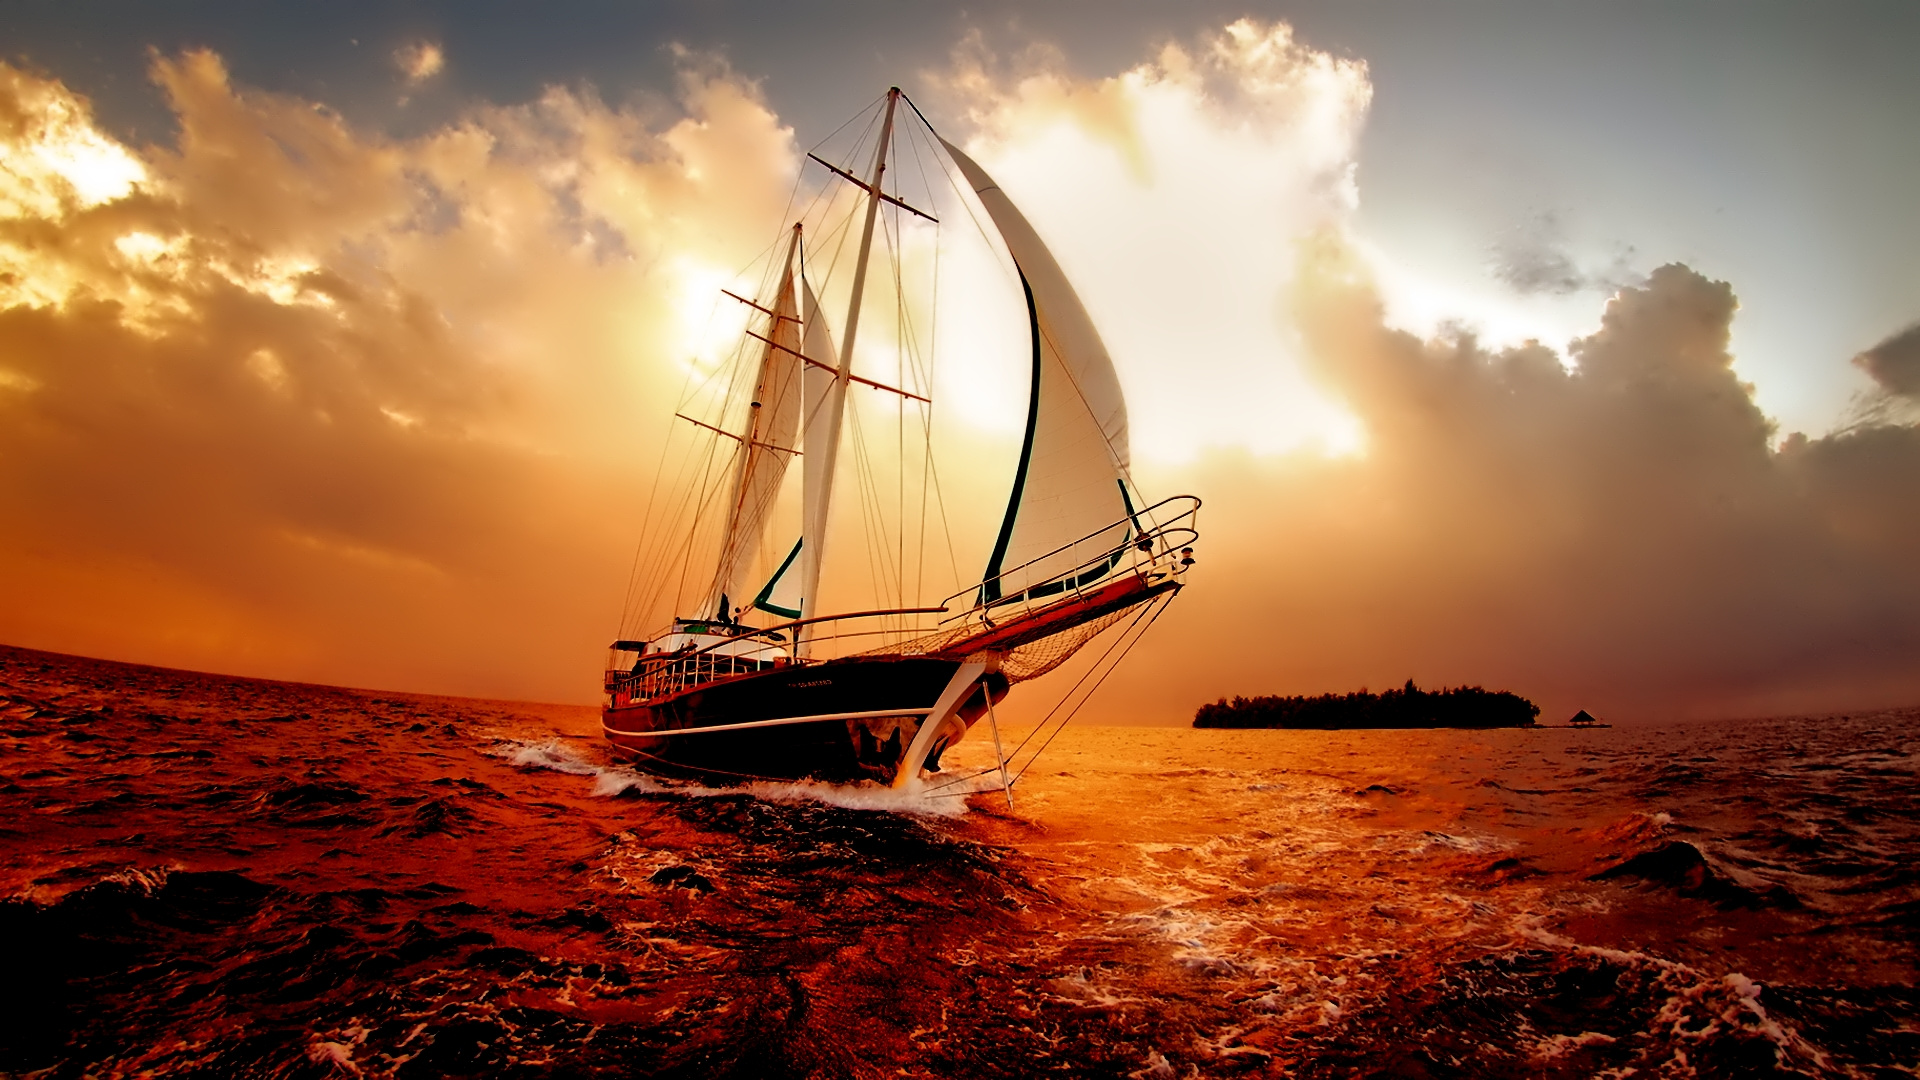 White Sail Boat on Sea During Sunset. Wallpaper in 1920x1080 Resolution